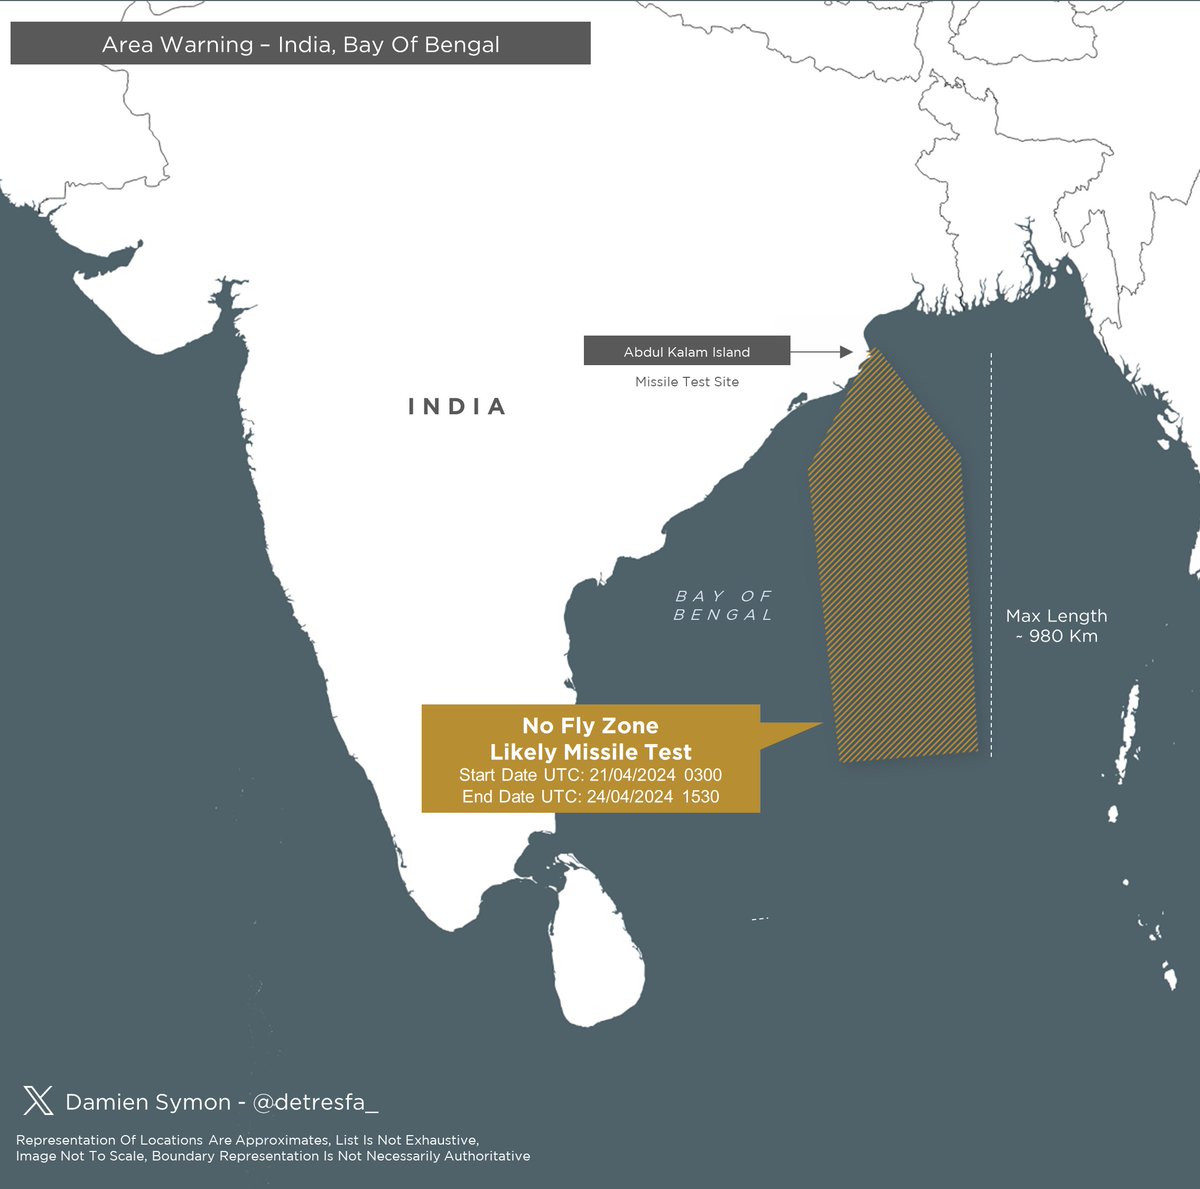 #AreaWarning: 🚨 India issues a notification for a no-fly zone over the  Bay Of Bengal Region from April 21-24, 2024, indicative of a likely  missile test. Stay informed and exercise caution in the designated area.  #BayOfBengal #MissileTest 🚀🛑